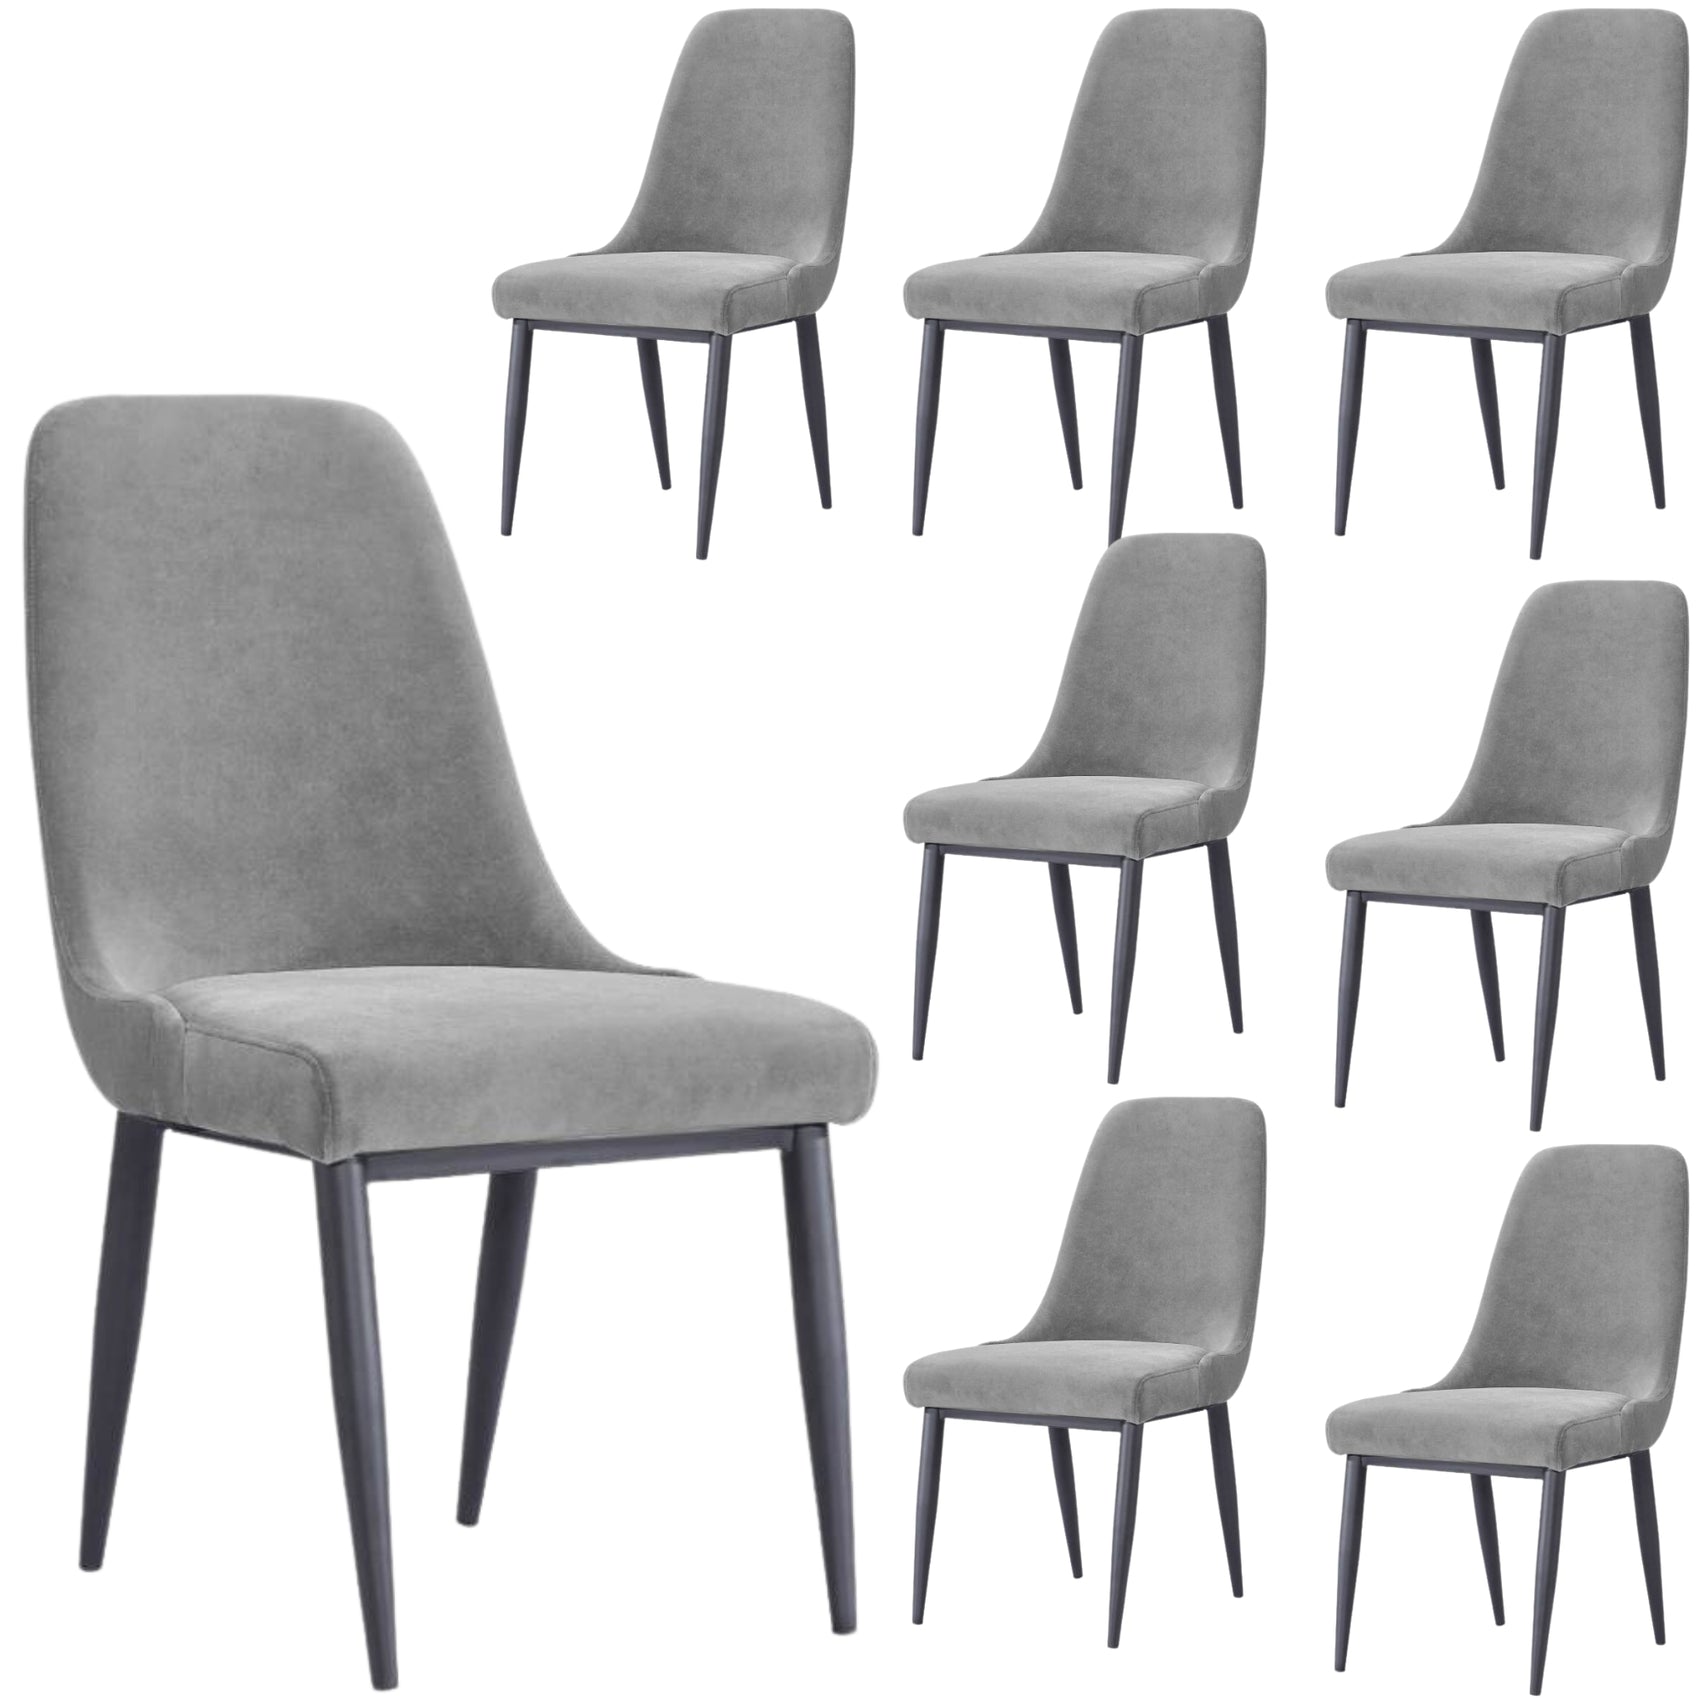 Eva Dining Chair Set of 8 Fabric Seat with Metal Frame - Grey